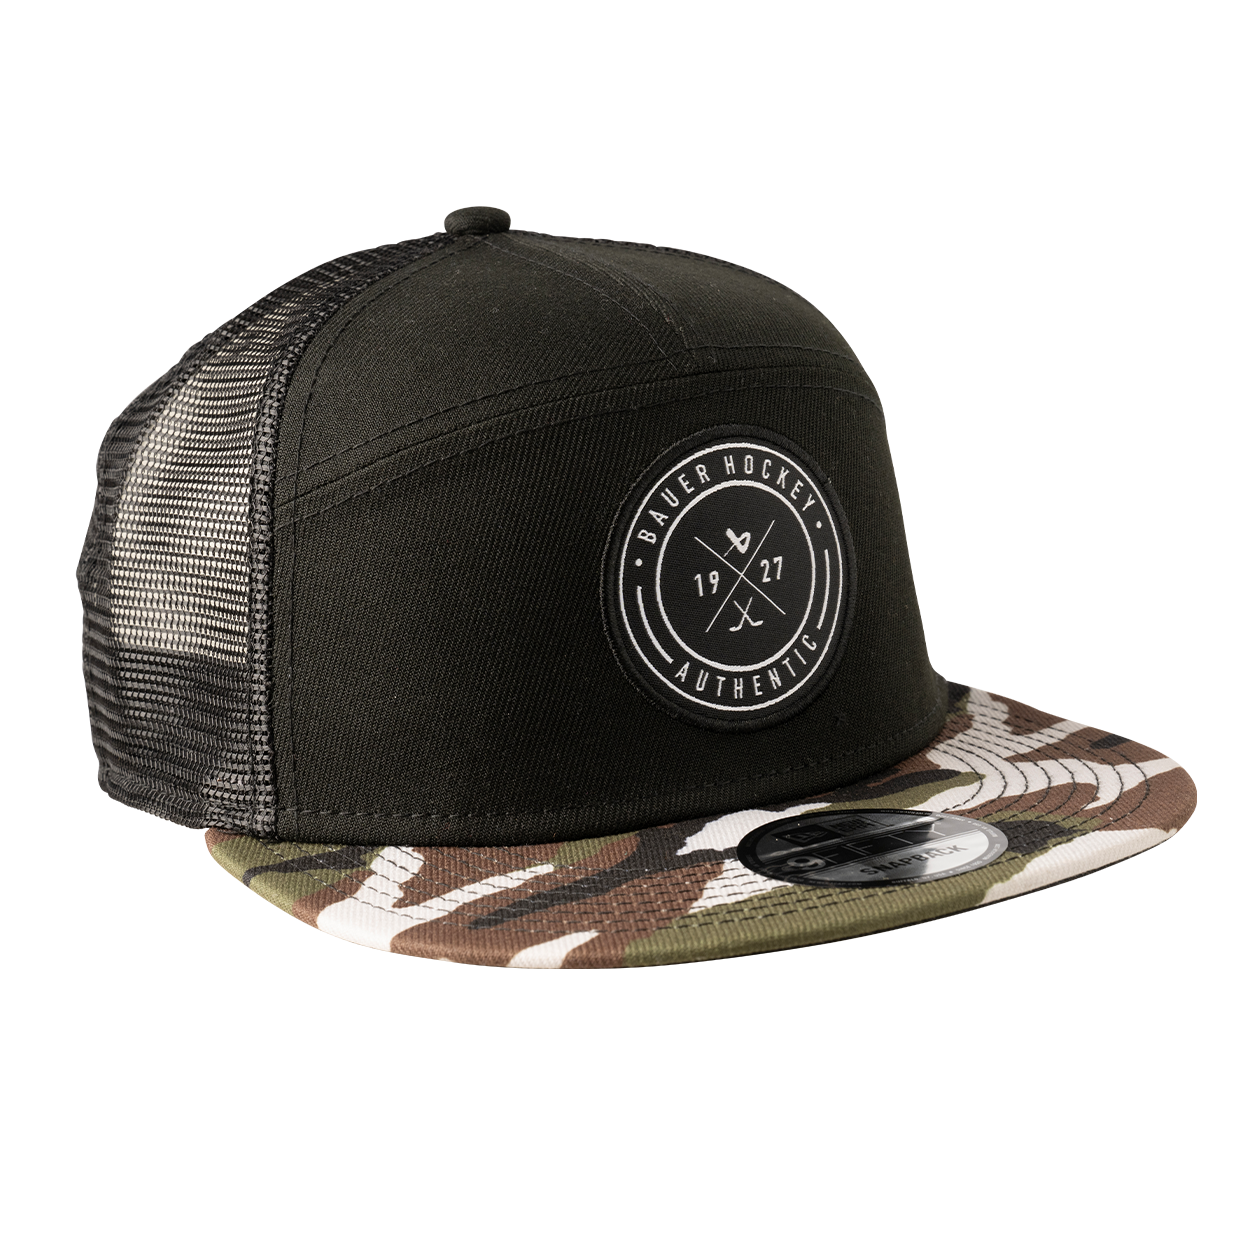 BAUER NEW ERA 5PANEL CAMO 9FIFTY YOUTH